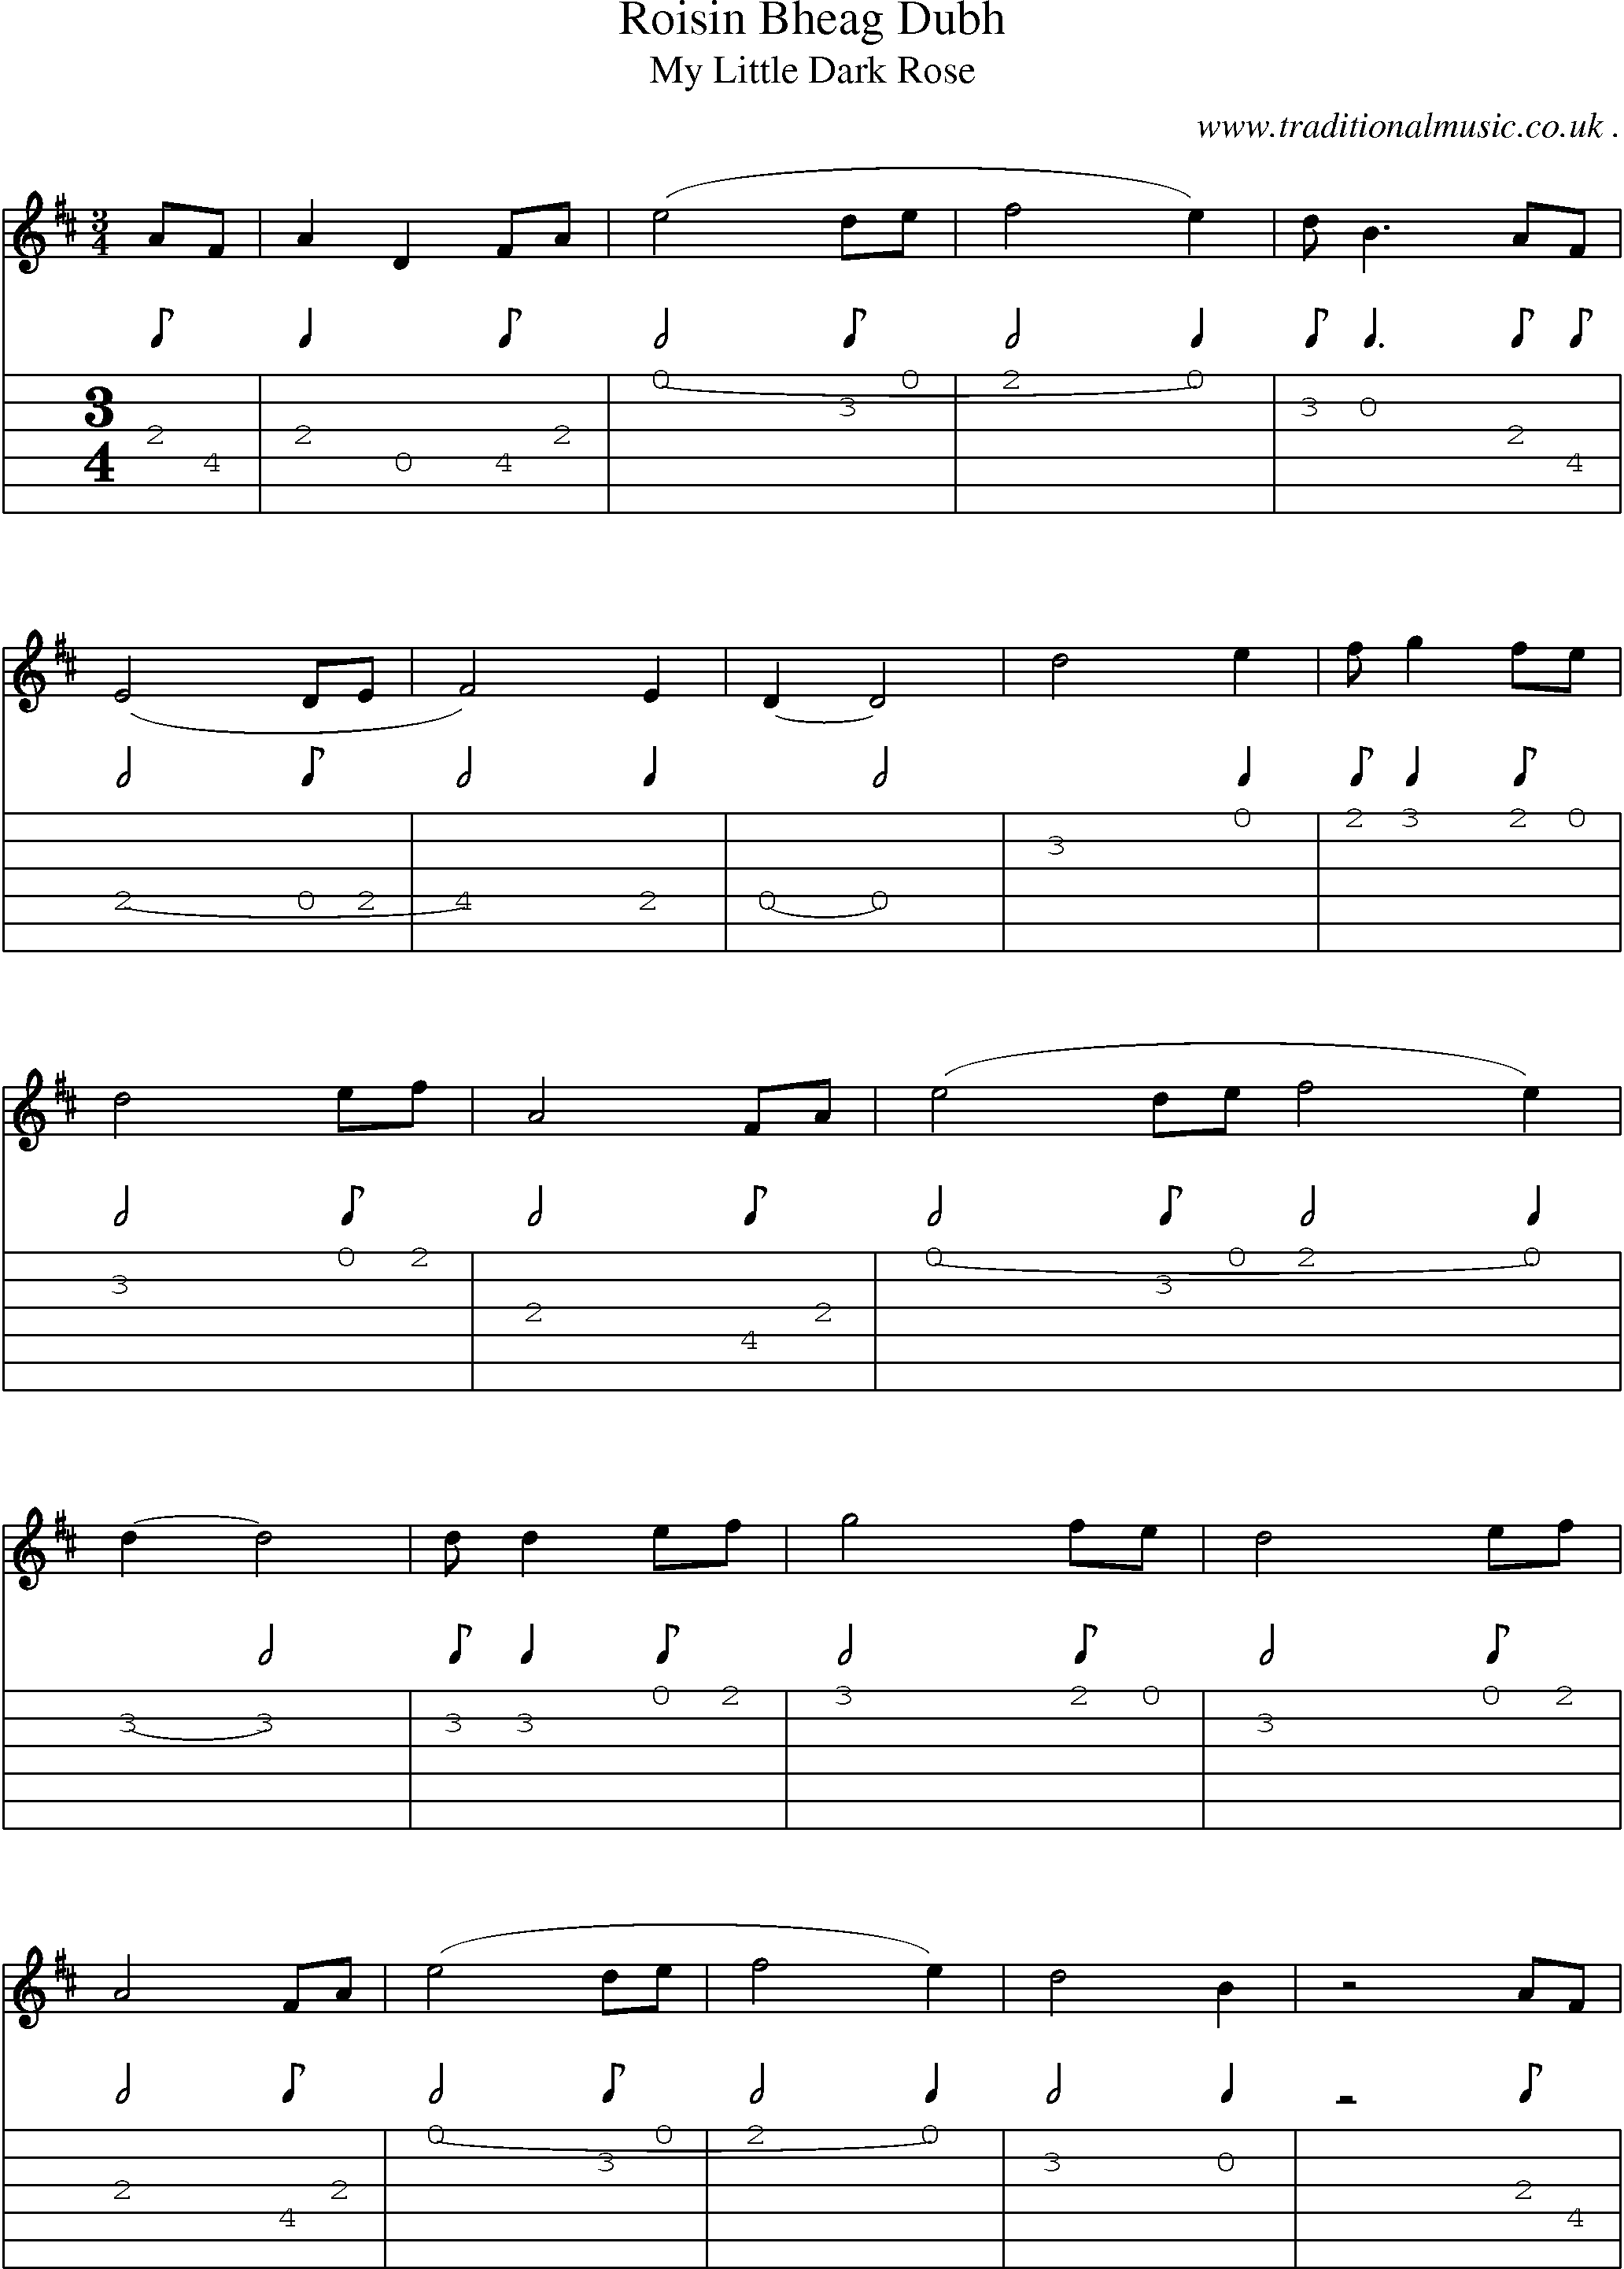 Sheet-Music and Guitar Tabs for Roisin Bheag Dubh